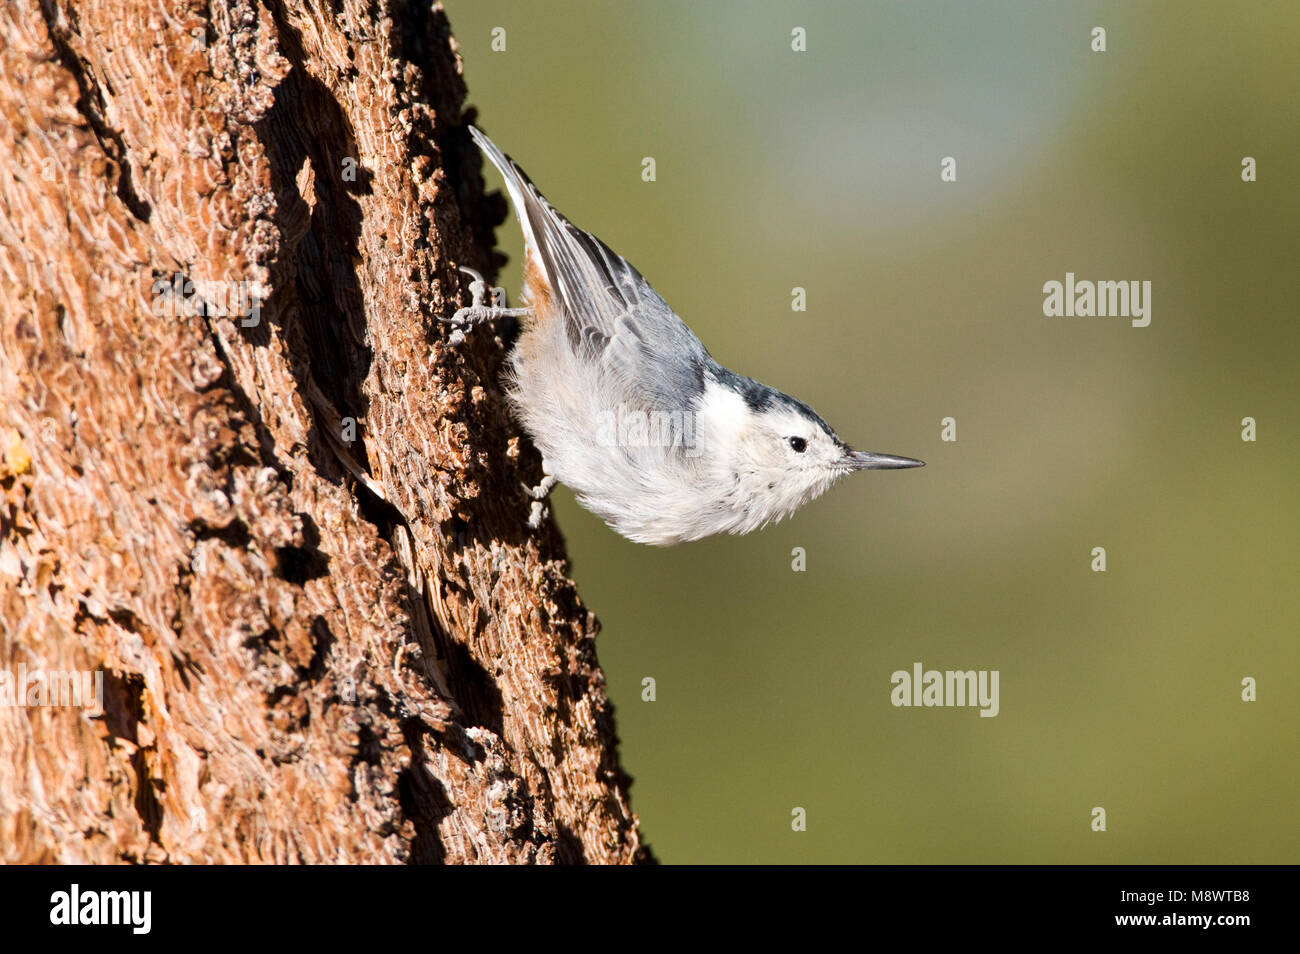 Witborst-boomklever; White-breasted Nuthatch Stock Photo